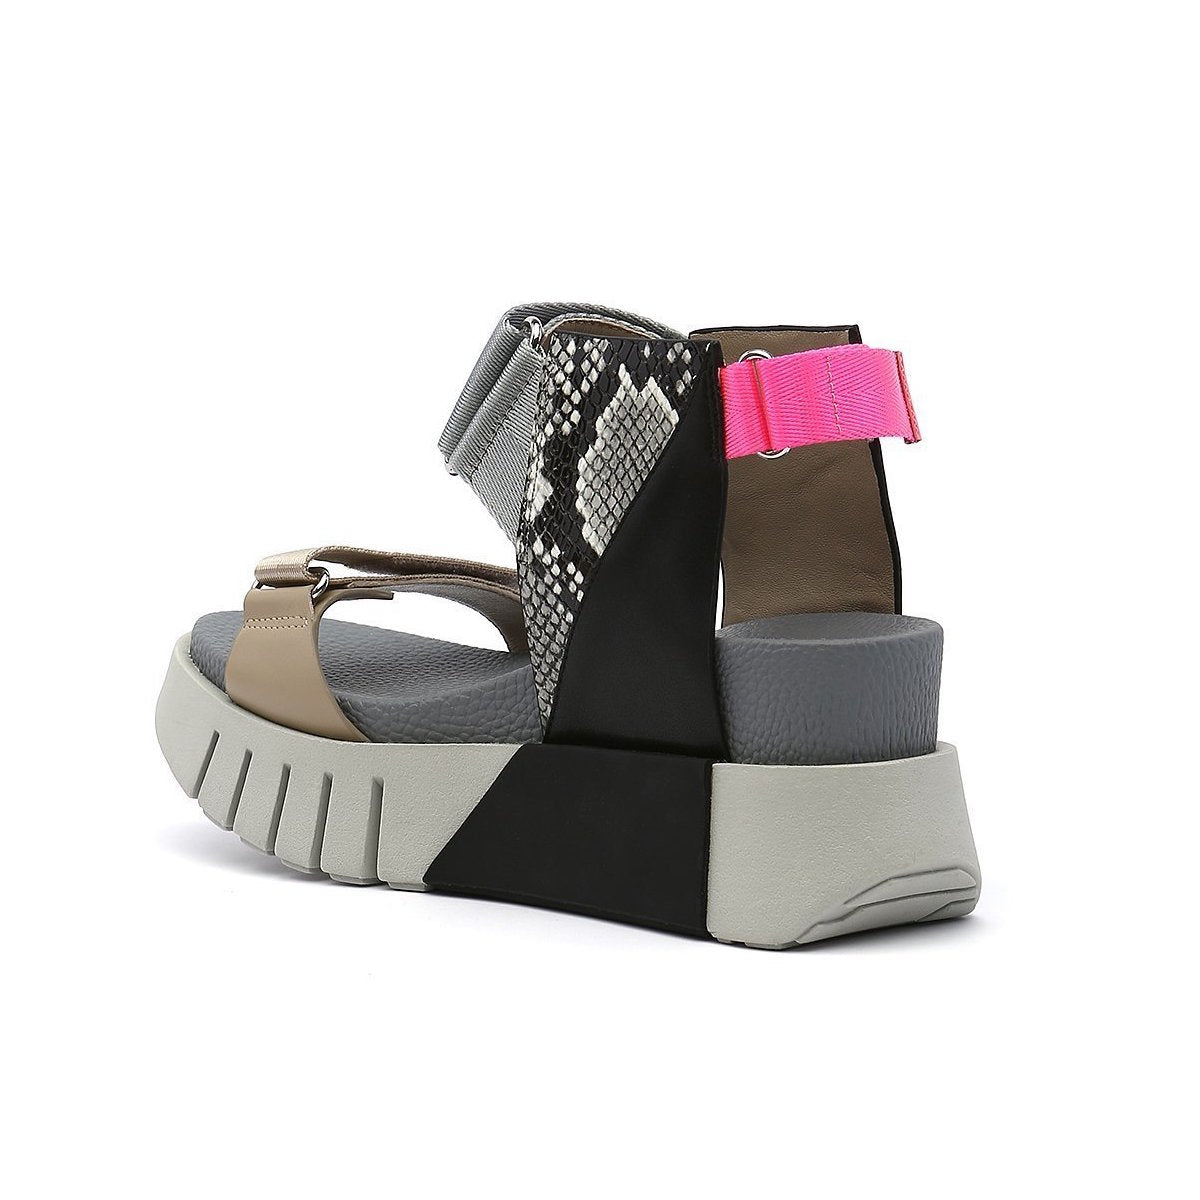 Inner back view of the united nude delta run sandal. This sandal is grey with gold, black, snake print, and a touch of hot pink. The sandal has a white platform sole and adjustable back, ankle, and toe bed straps.